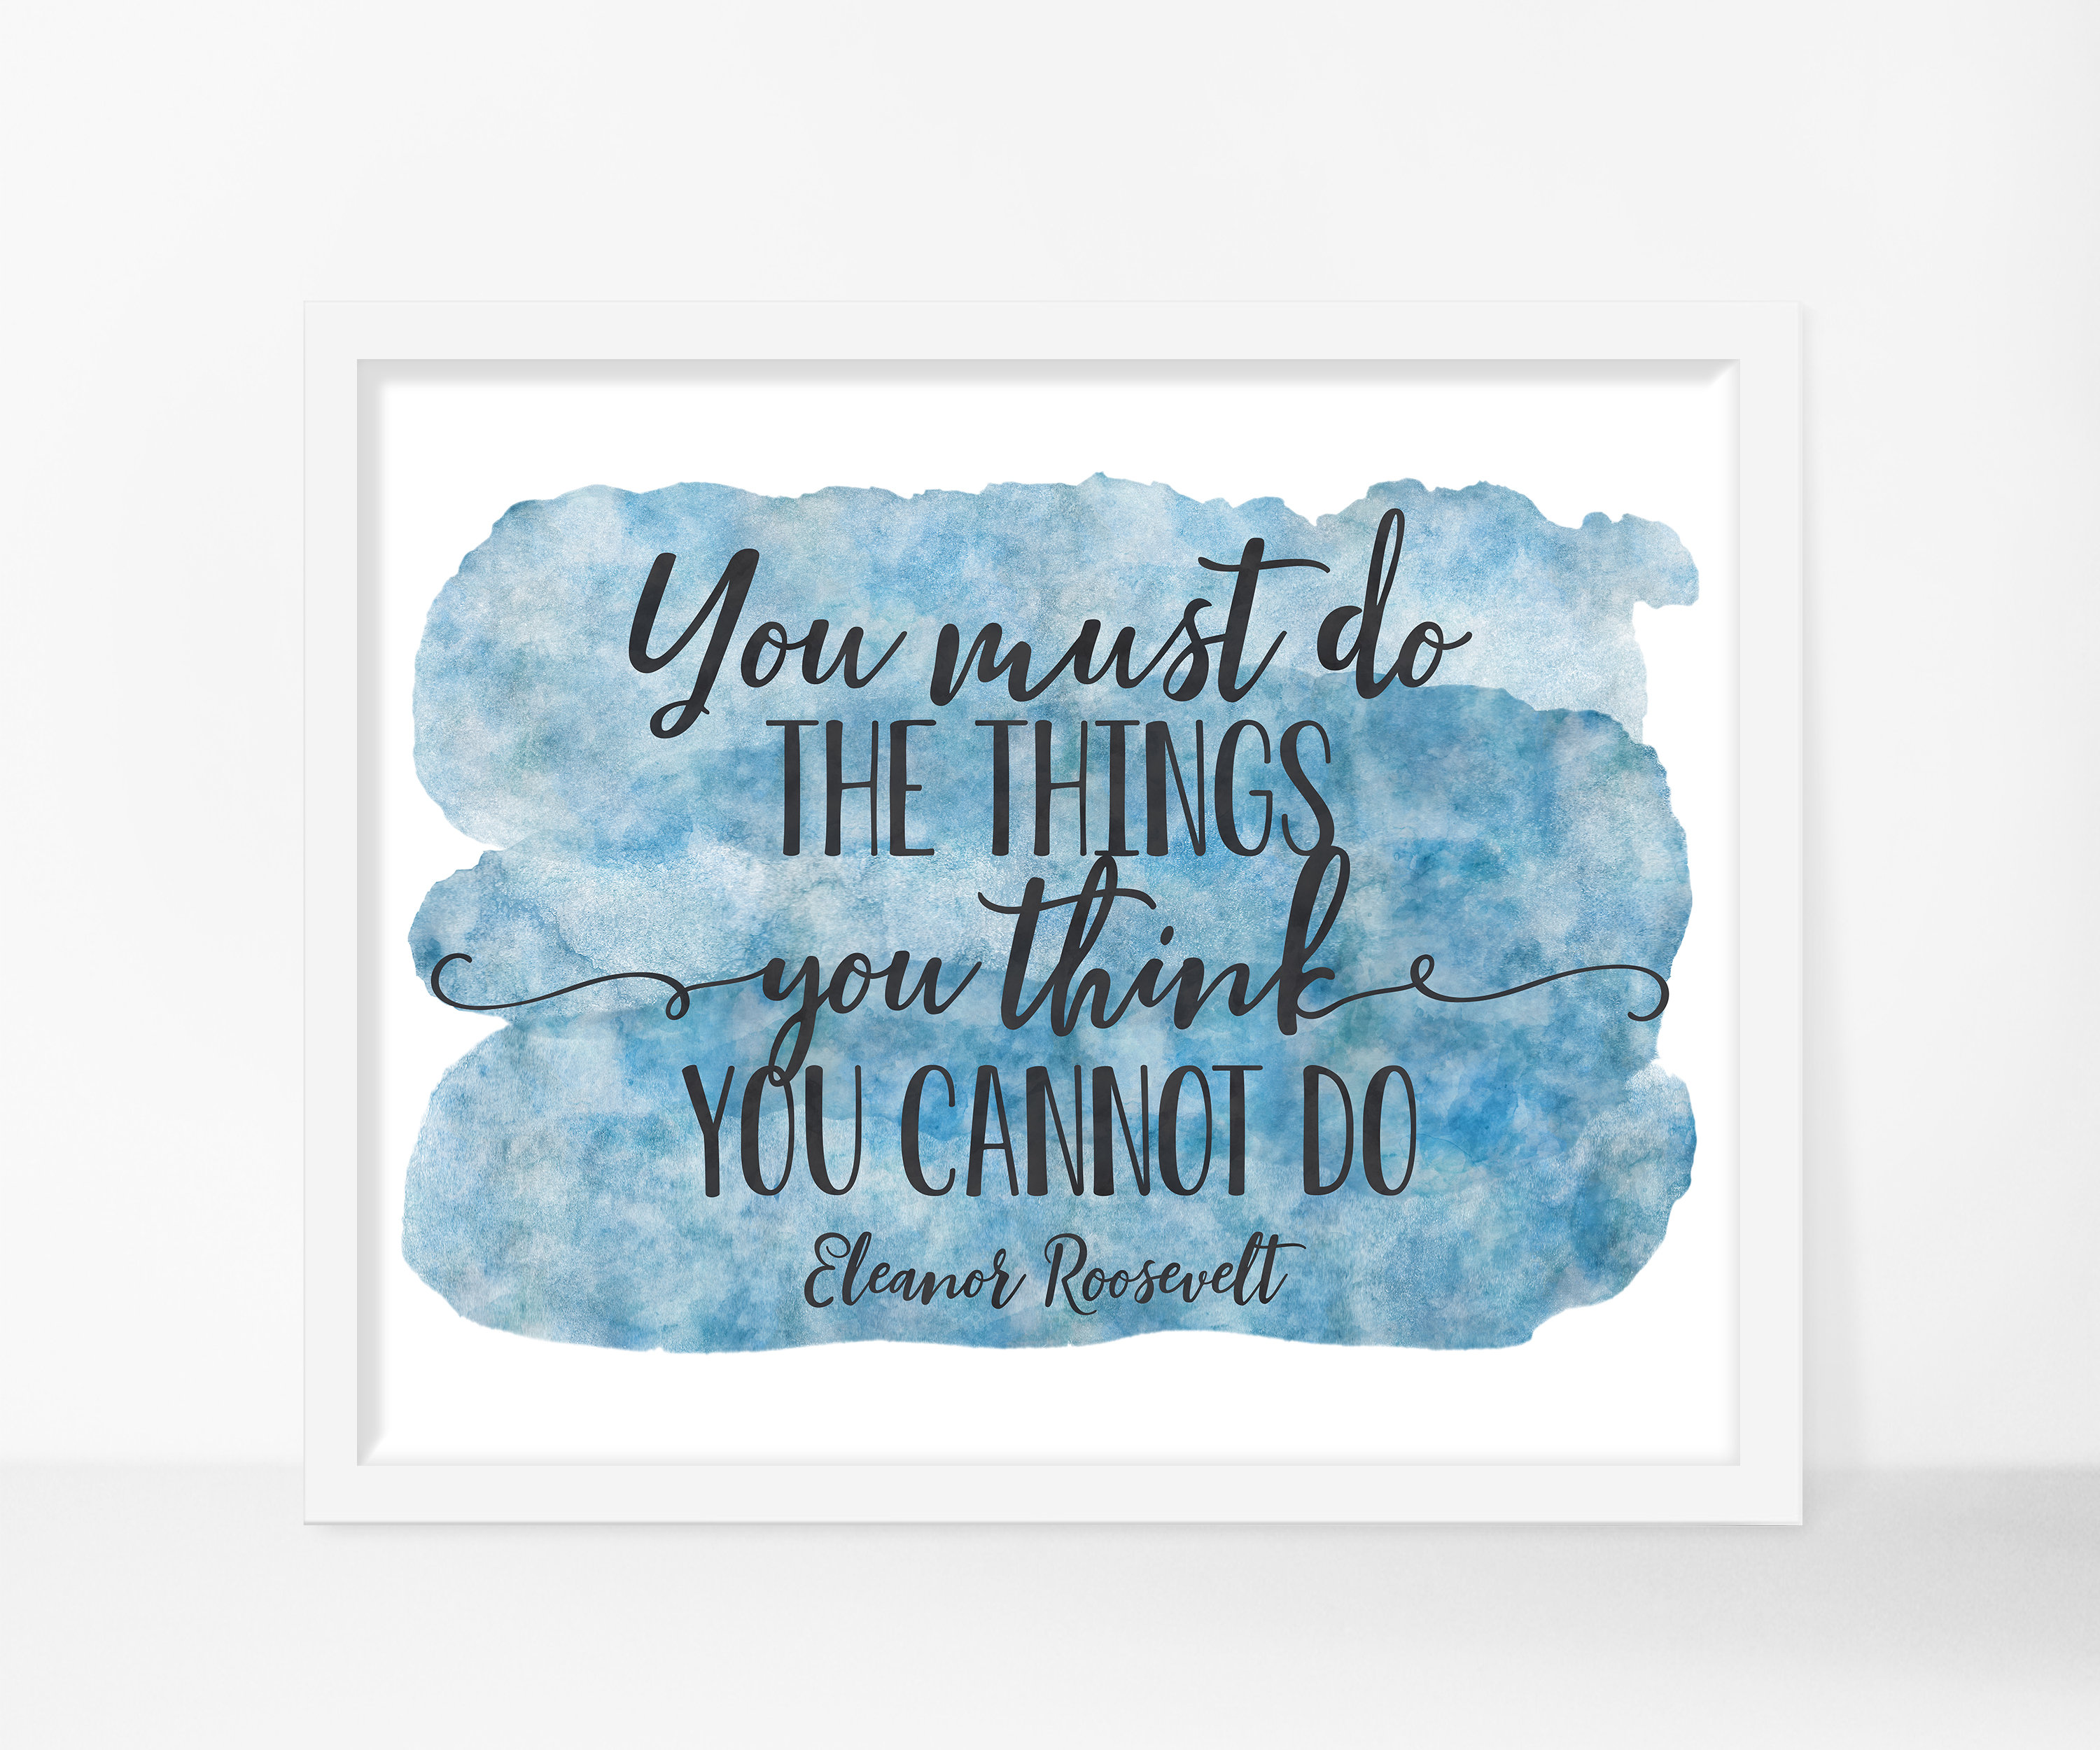 You Must Do The Things You Think You Cannot Do,Inspirational Wall Art Print